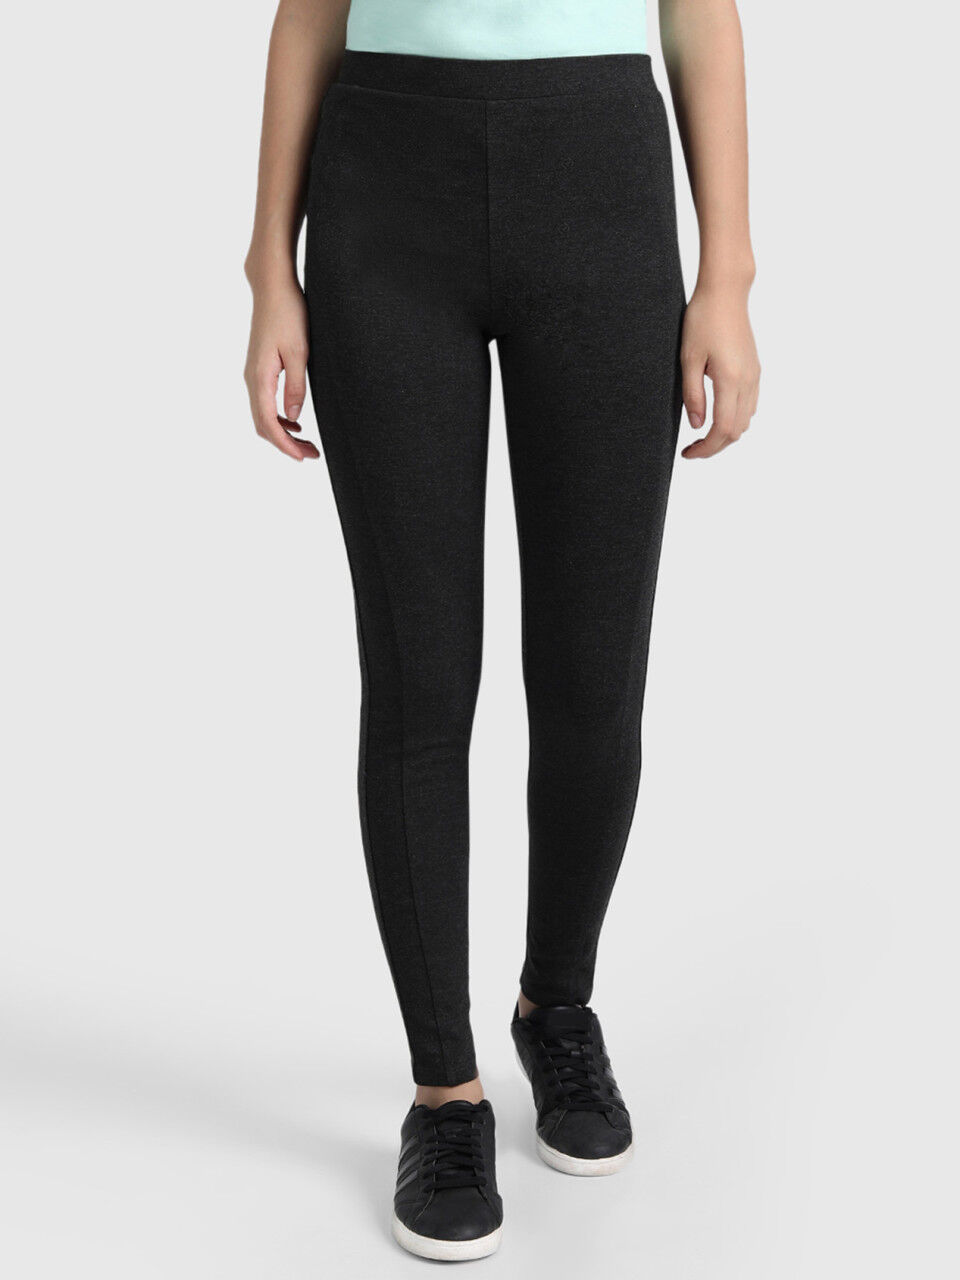 Polyester Leggings in Cut and Sew Design